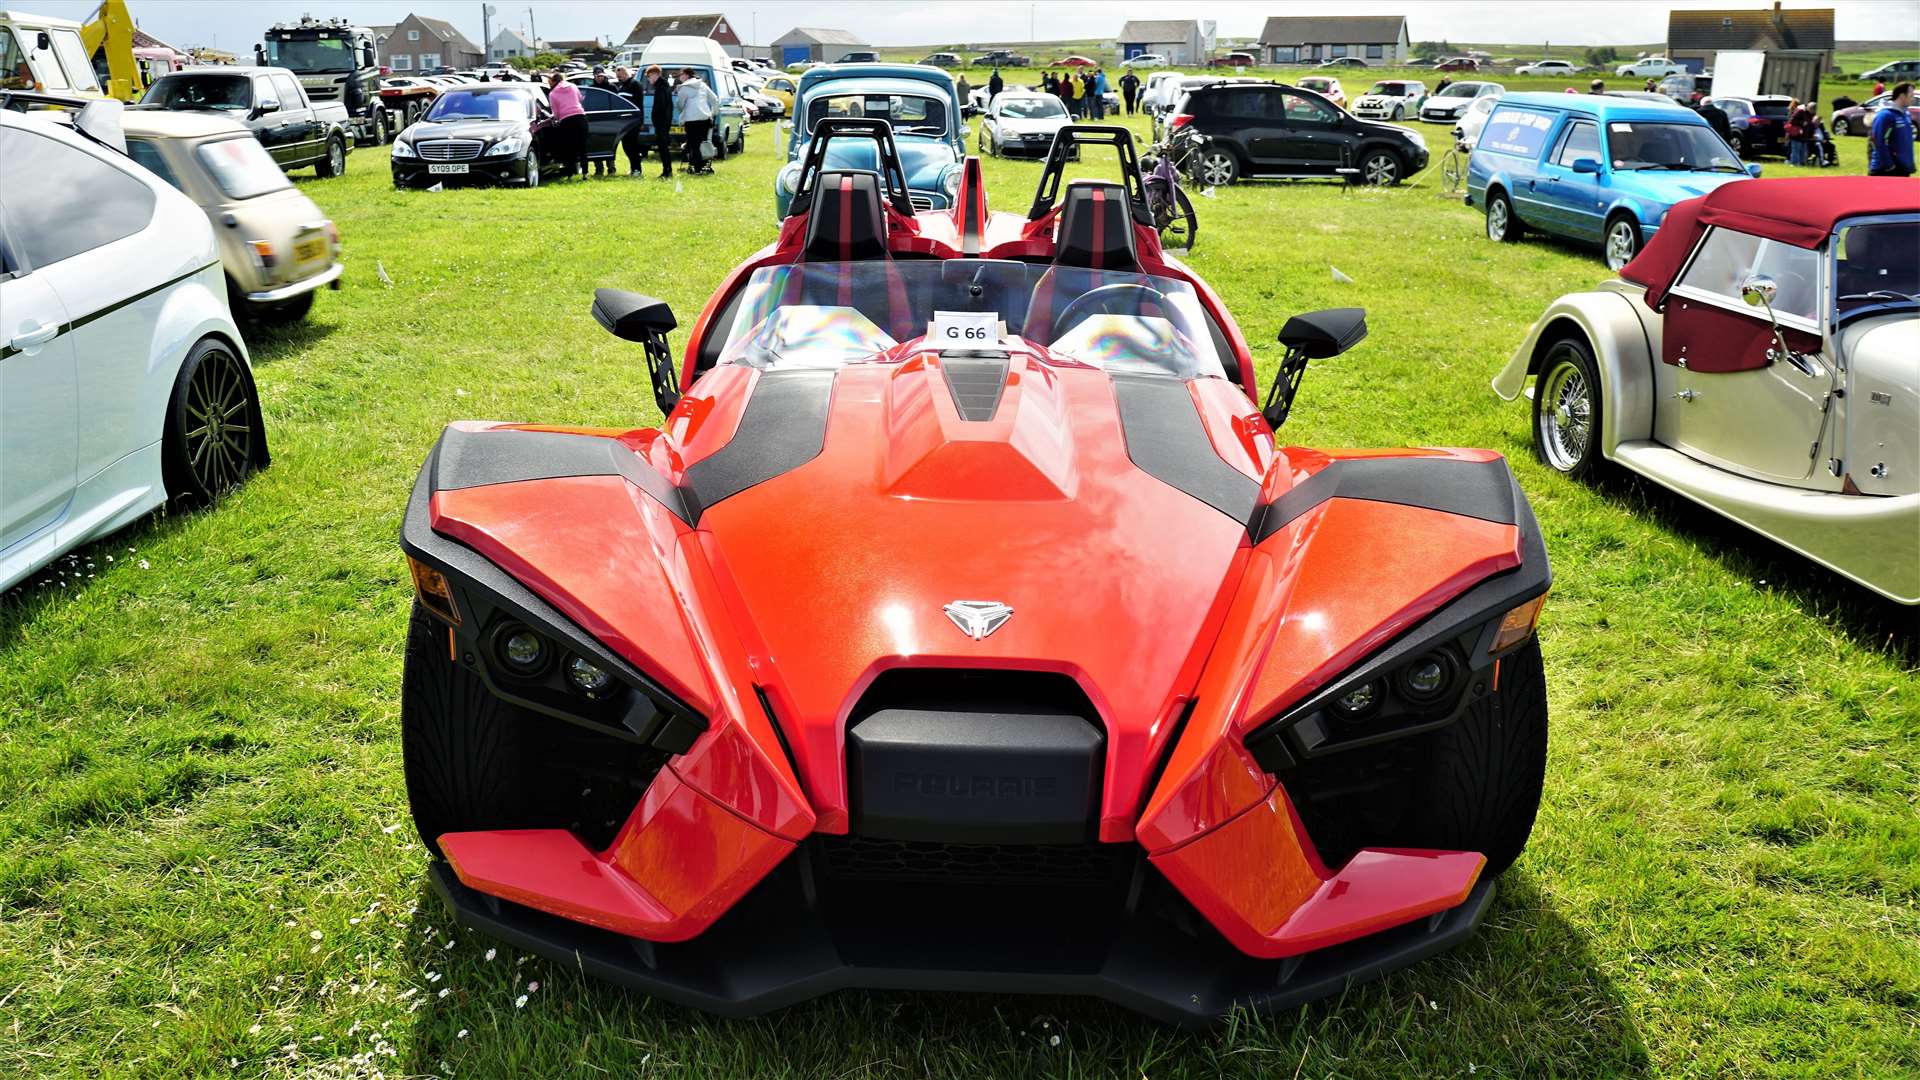 2016 Polaris Slingshot owned by Eian Sutherland from Scrabster. Picture: DGS